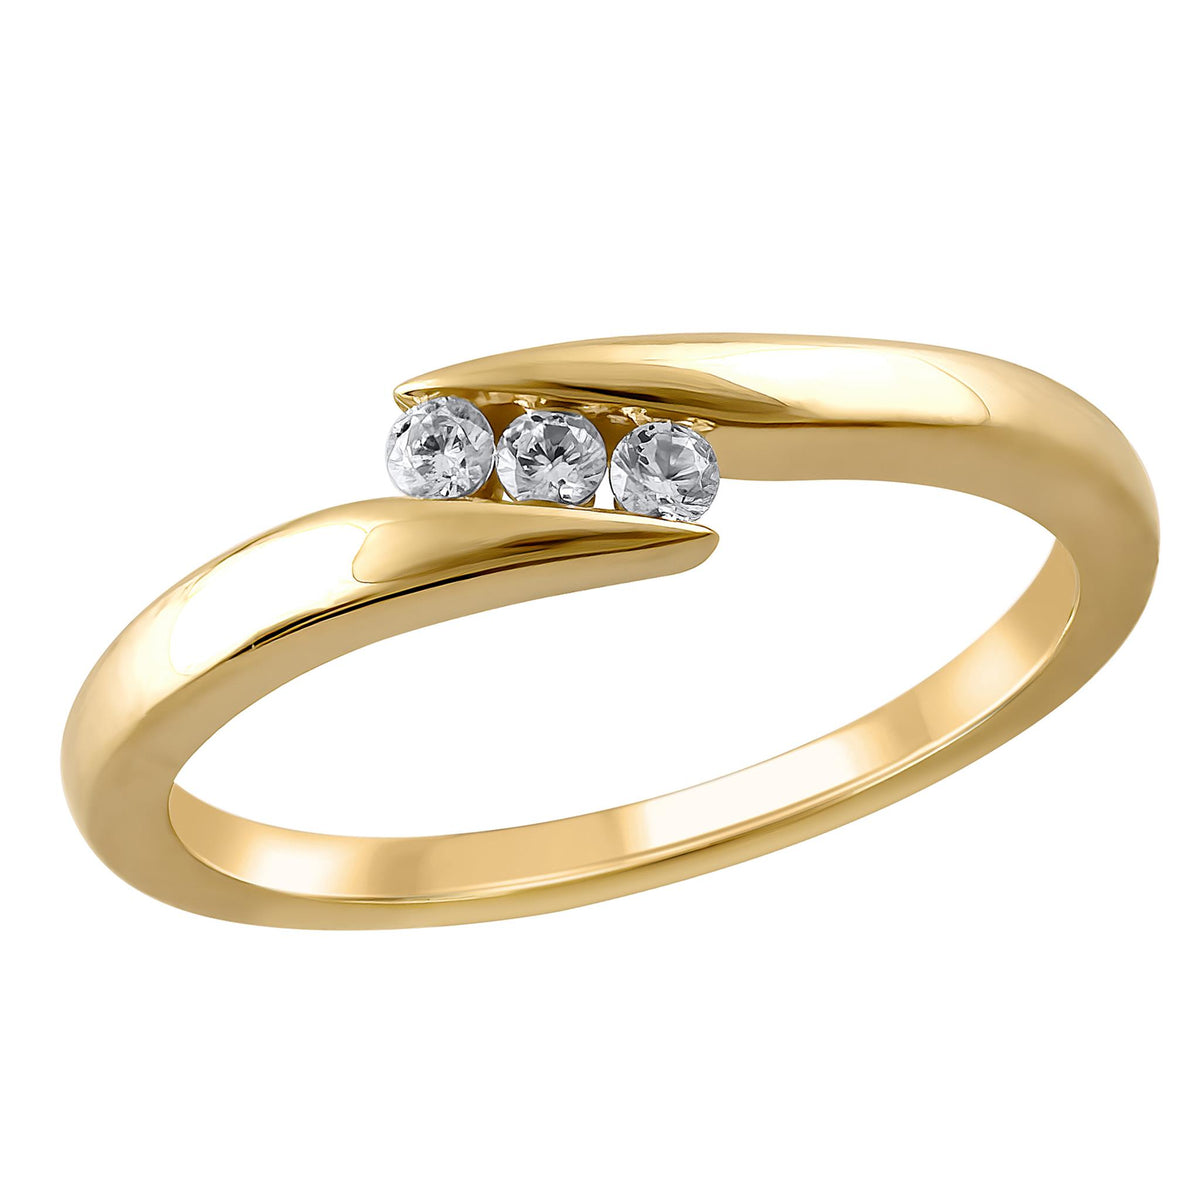 10Kt Yellow Gold Bypass Channel Fashion Ring With .10cttw Natural Diamonds